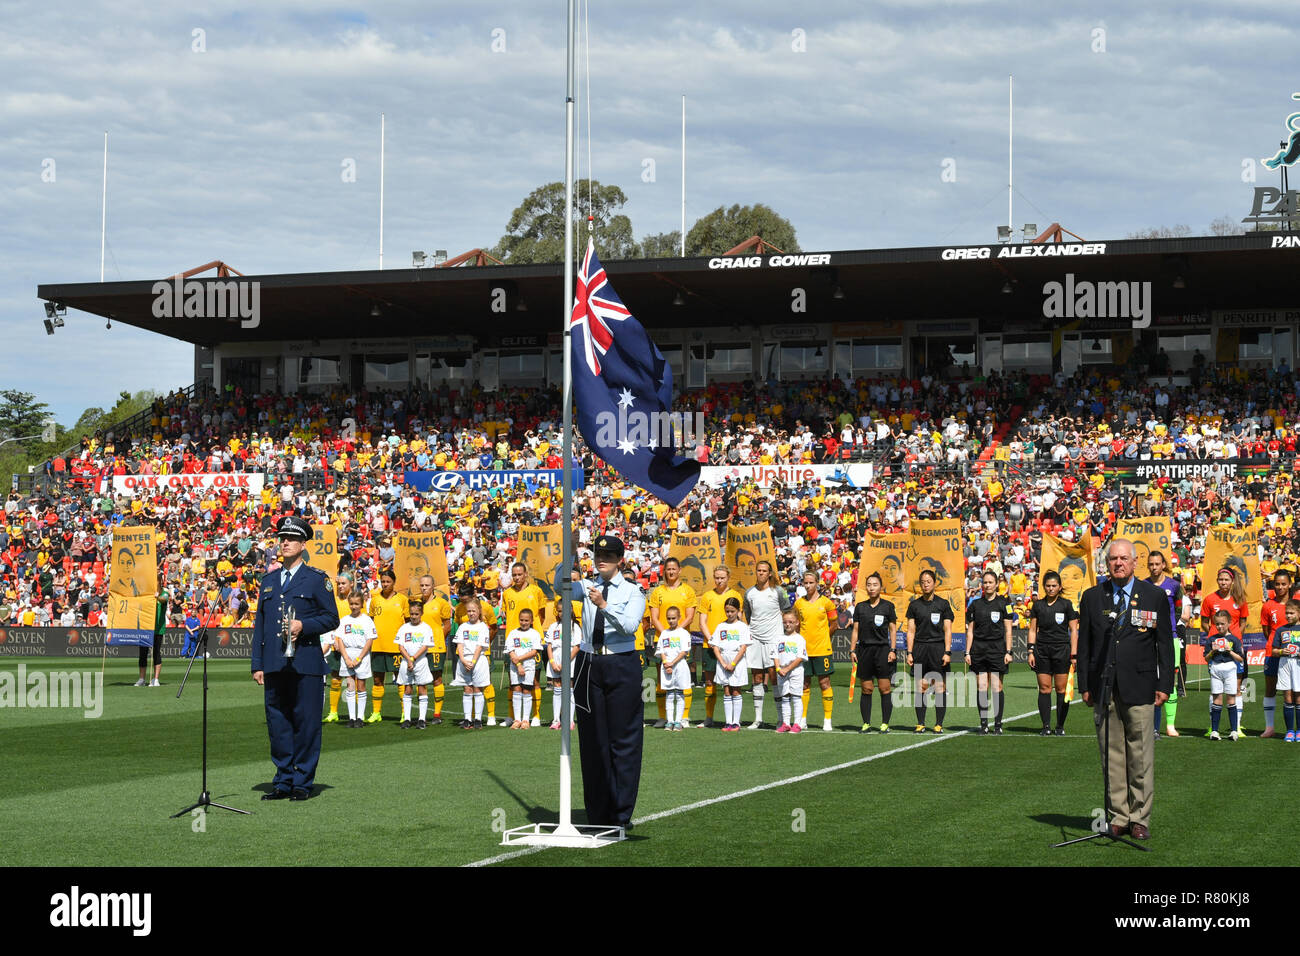 International Friendly Match Between Australia Women And Chile Women At Panthers Stadium In Penrith Australia Chile Won 3 2 Featuring Atmosphere Where Sydney New South Wales Australia When 10 Nov 2018 Credit Wenn Com